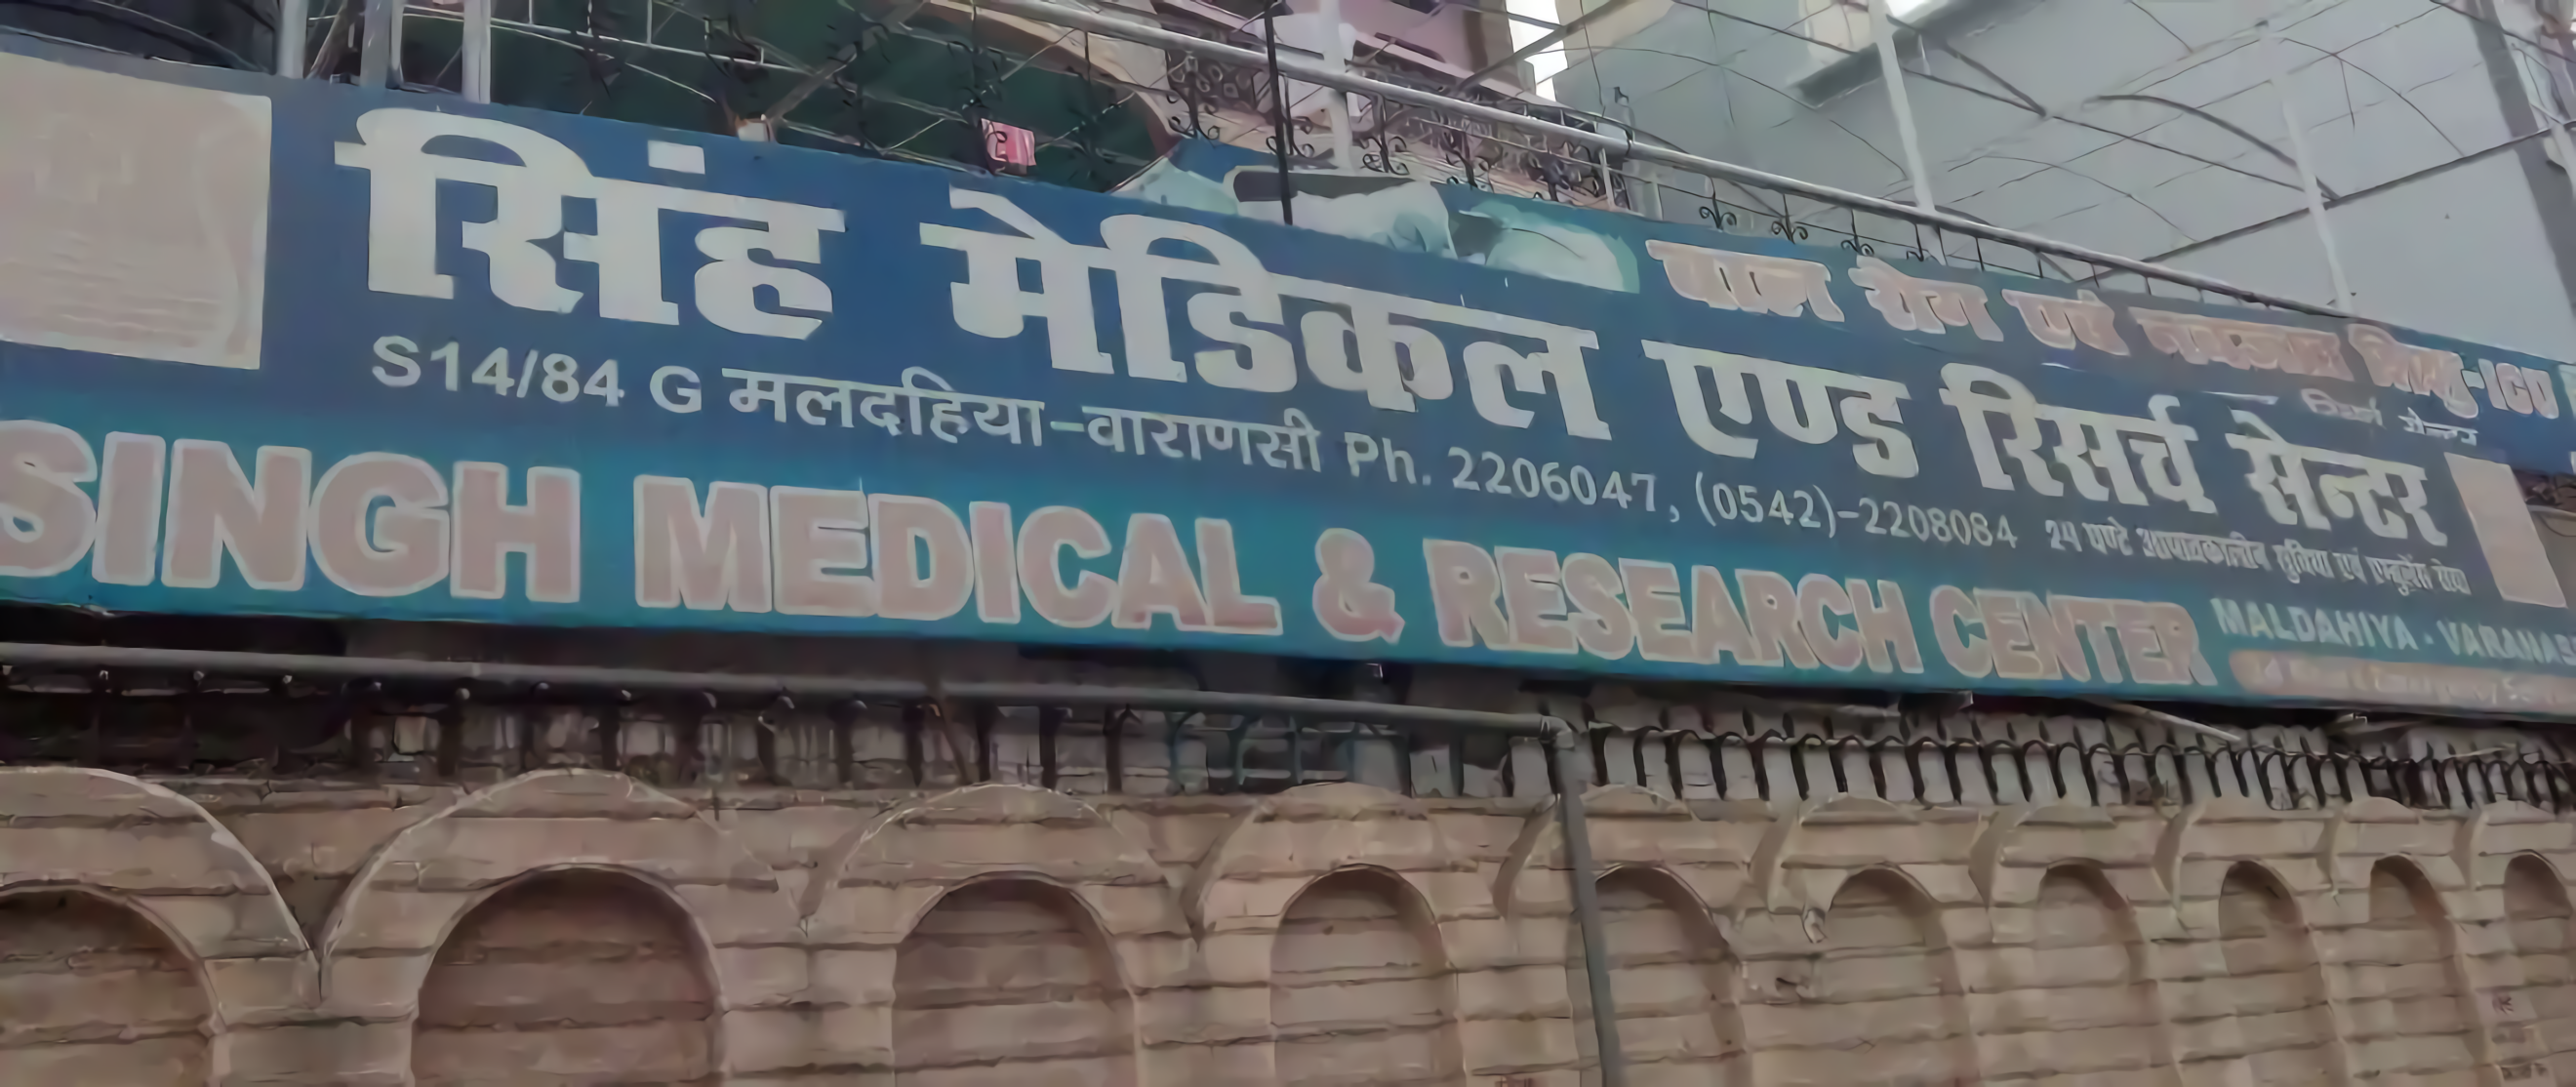 Singh Medical and Research Center